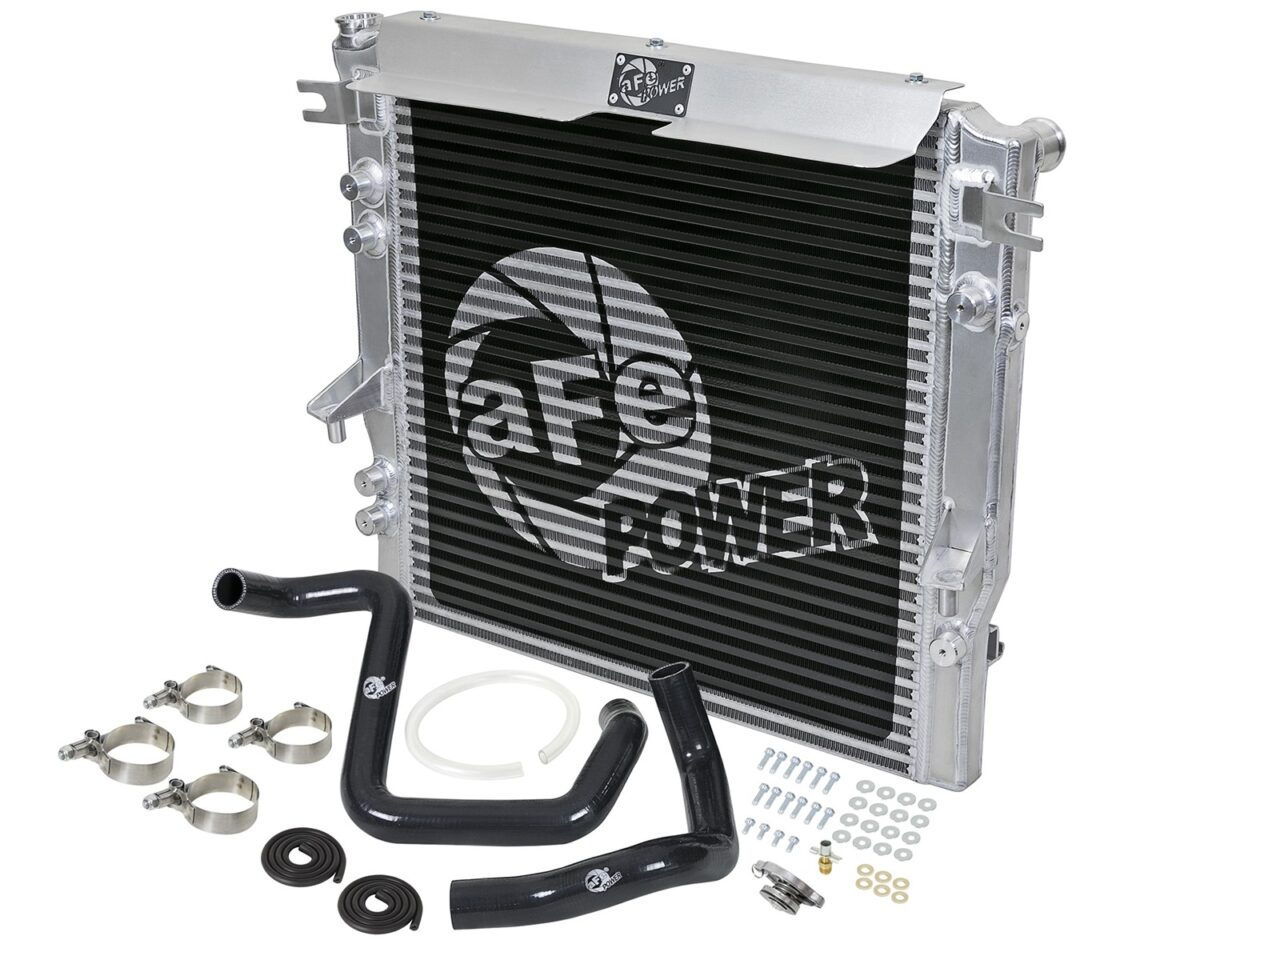 Heavy-duty aftermarket aFe POWER radiator for Jeep Wrangler with radiator hoses and hardware on white background